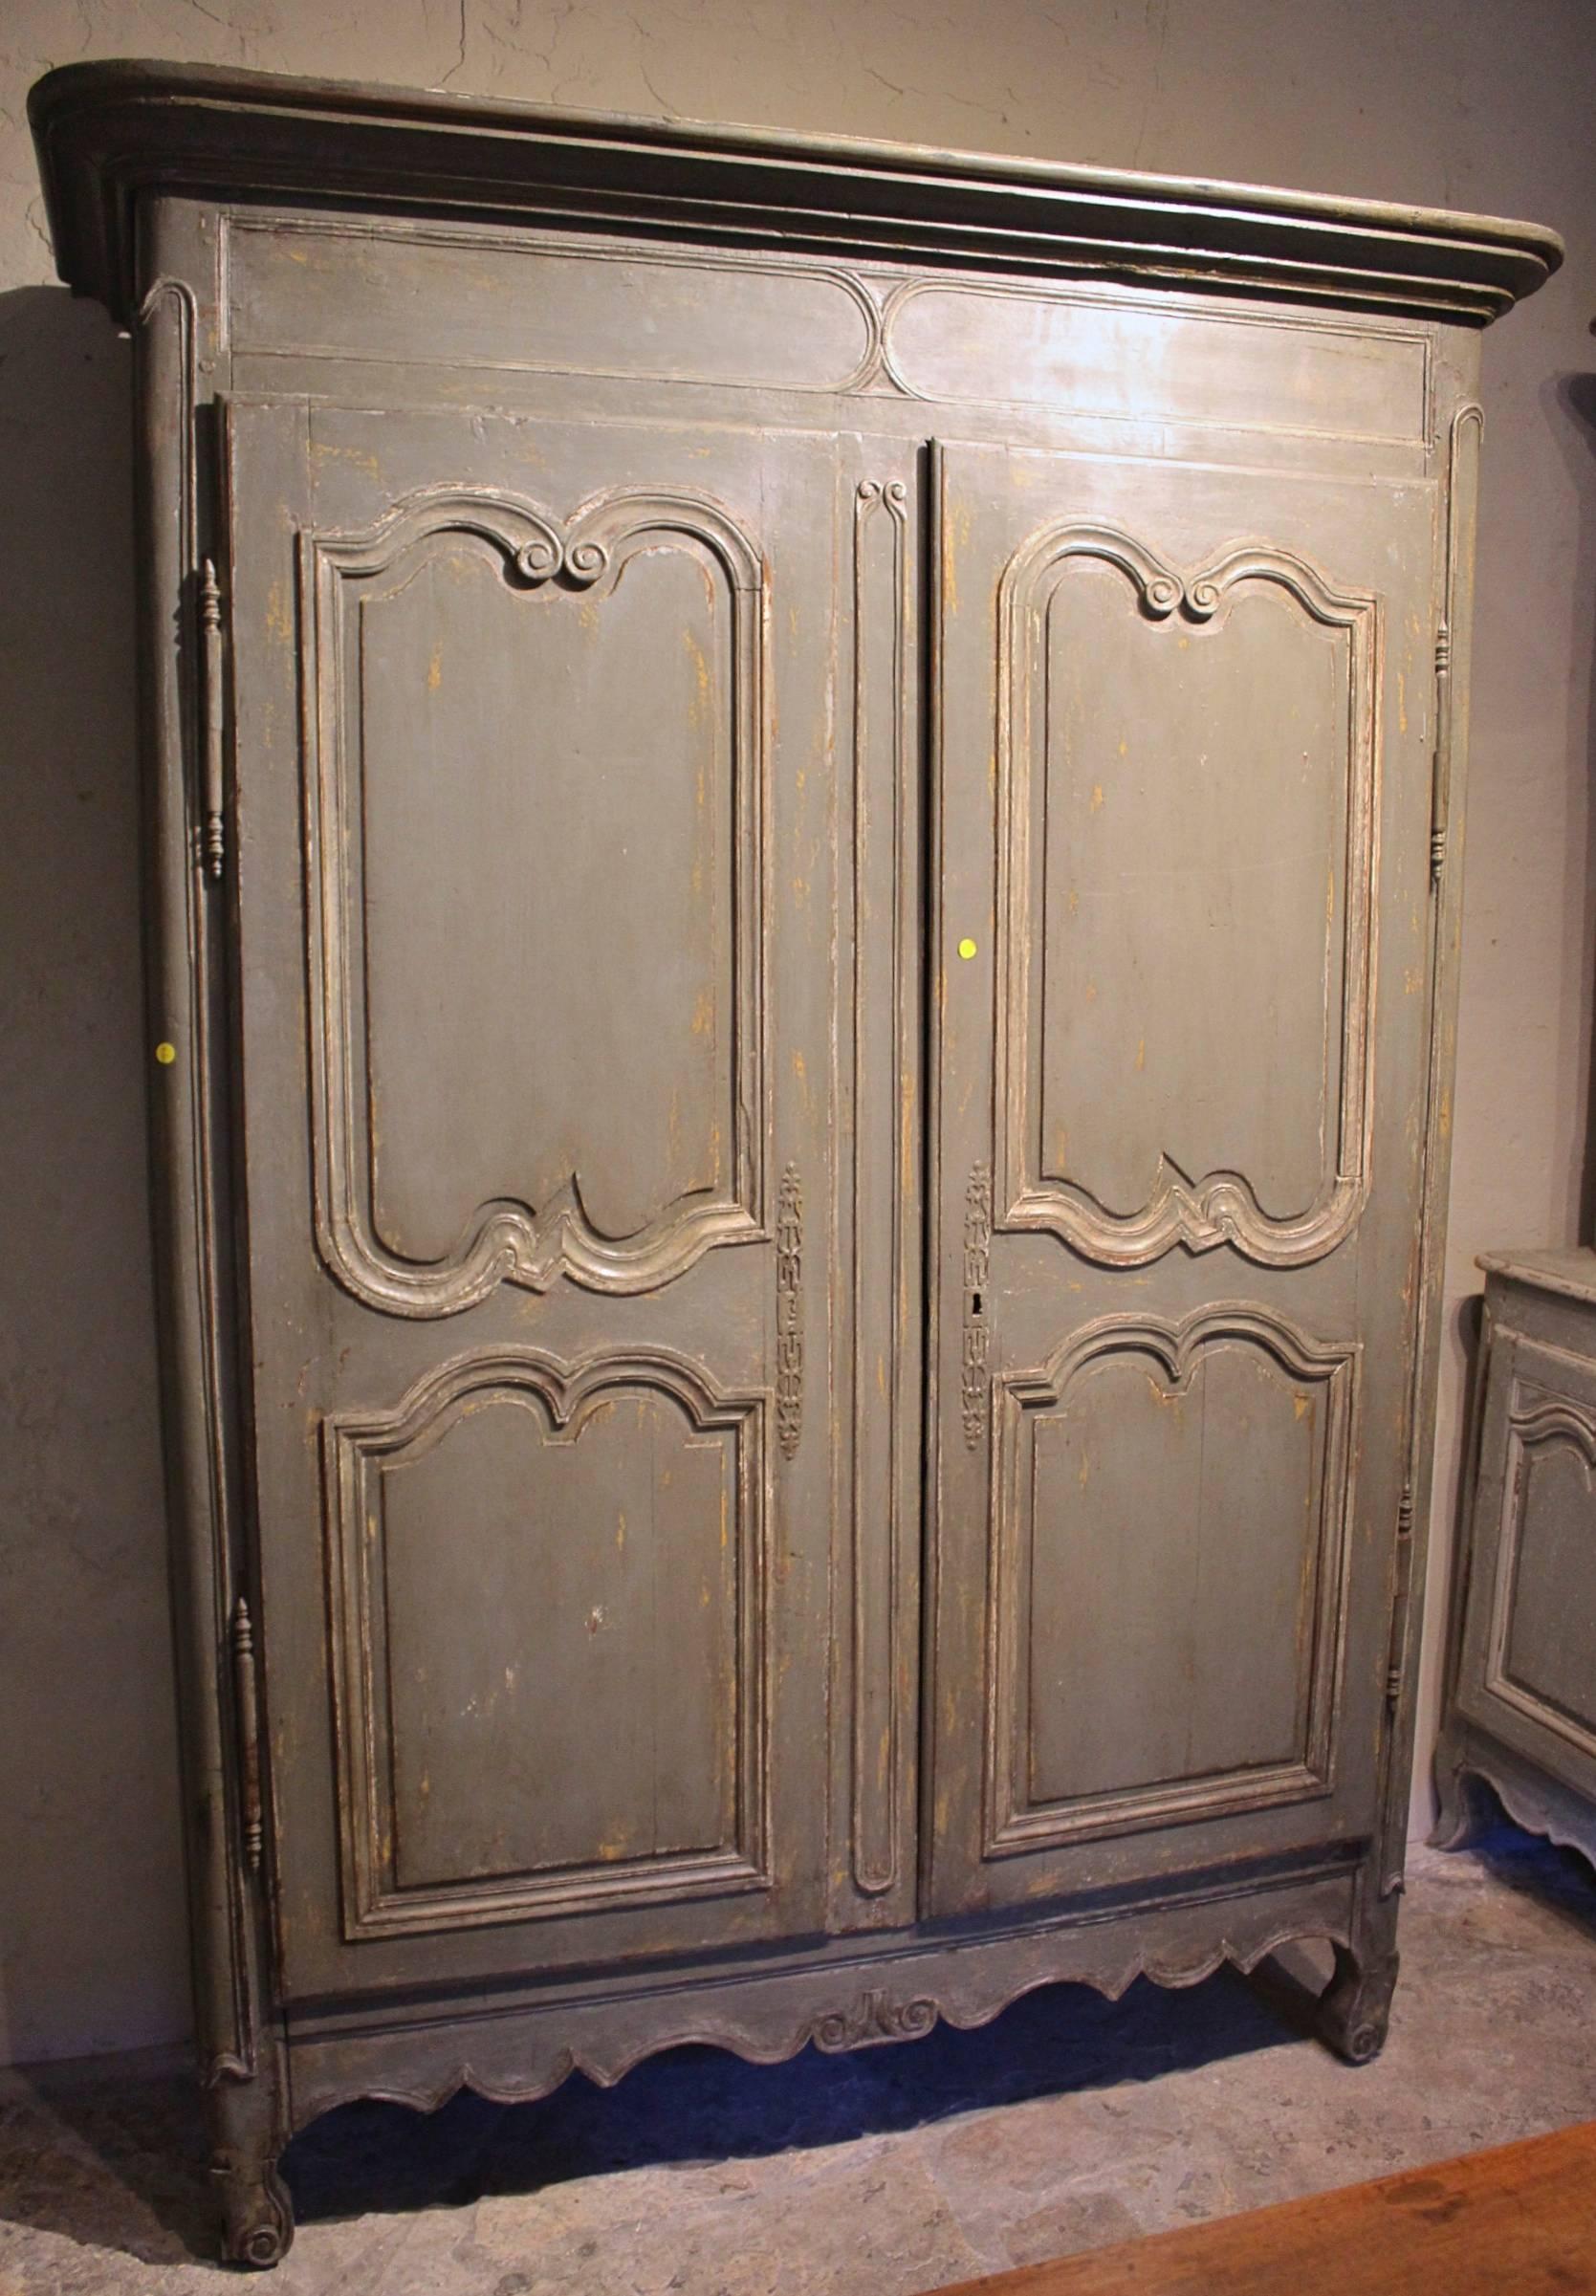 Antique French period Louis XV armoire
End of 18th century
French paint in deep French grey with French wax.
Original Pewter hardware.
 